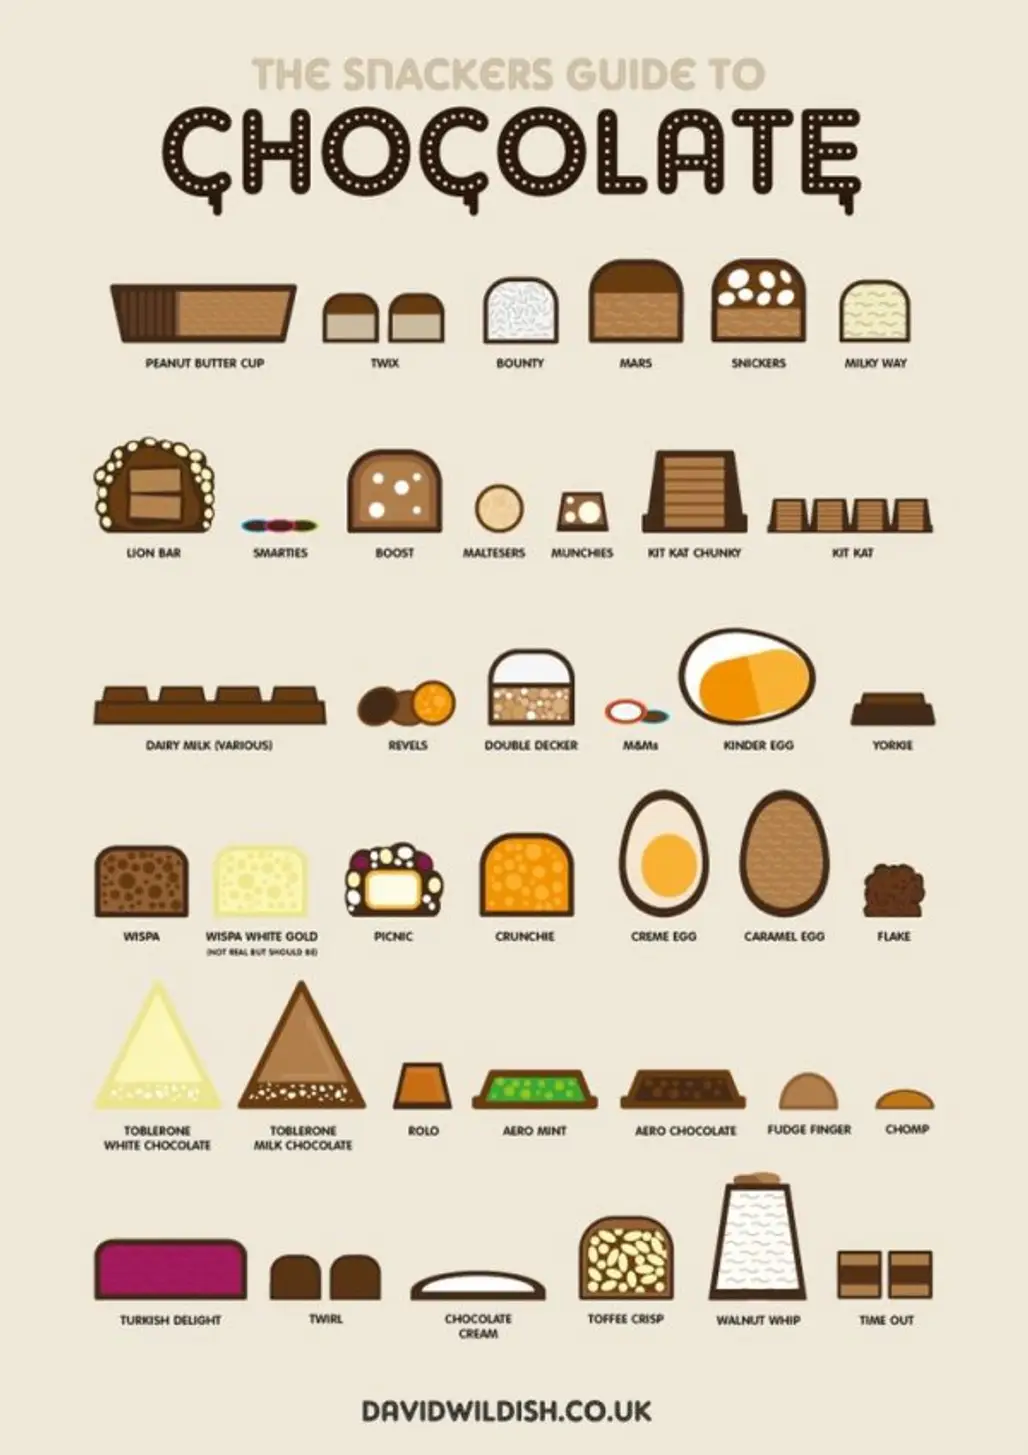 The Snackers Guide to Chocolate